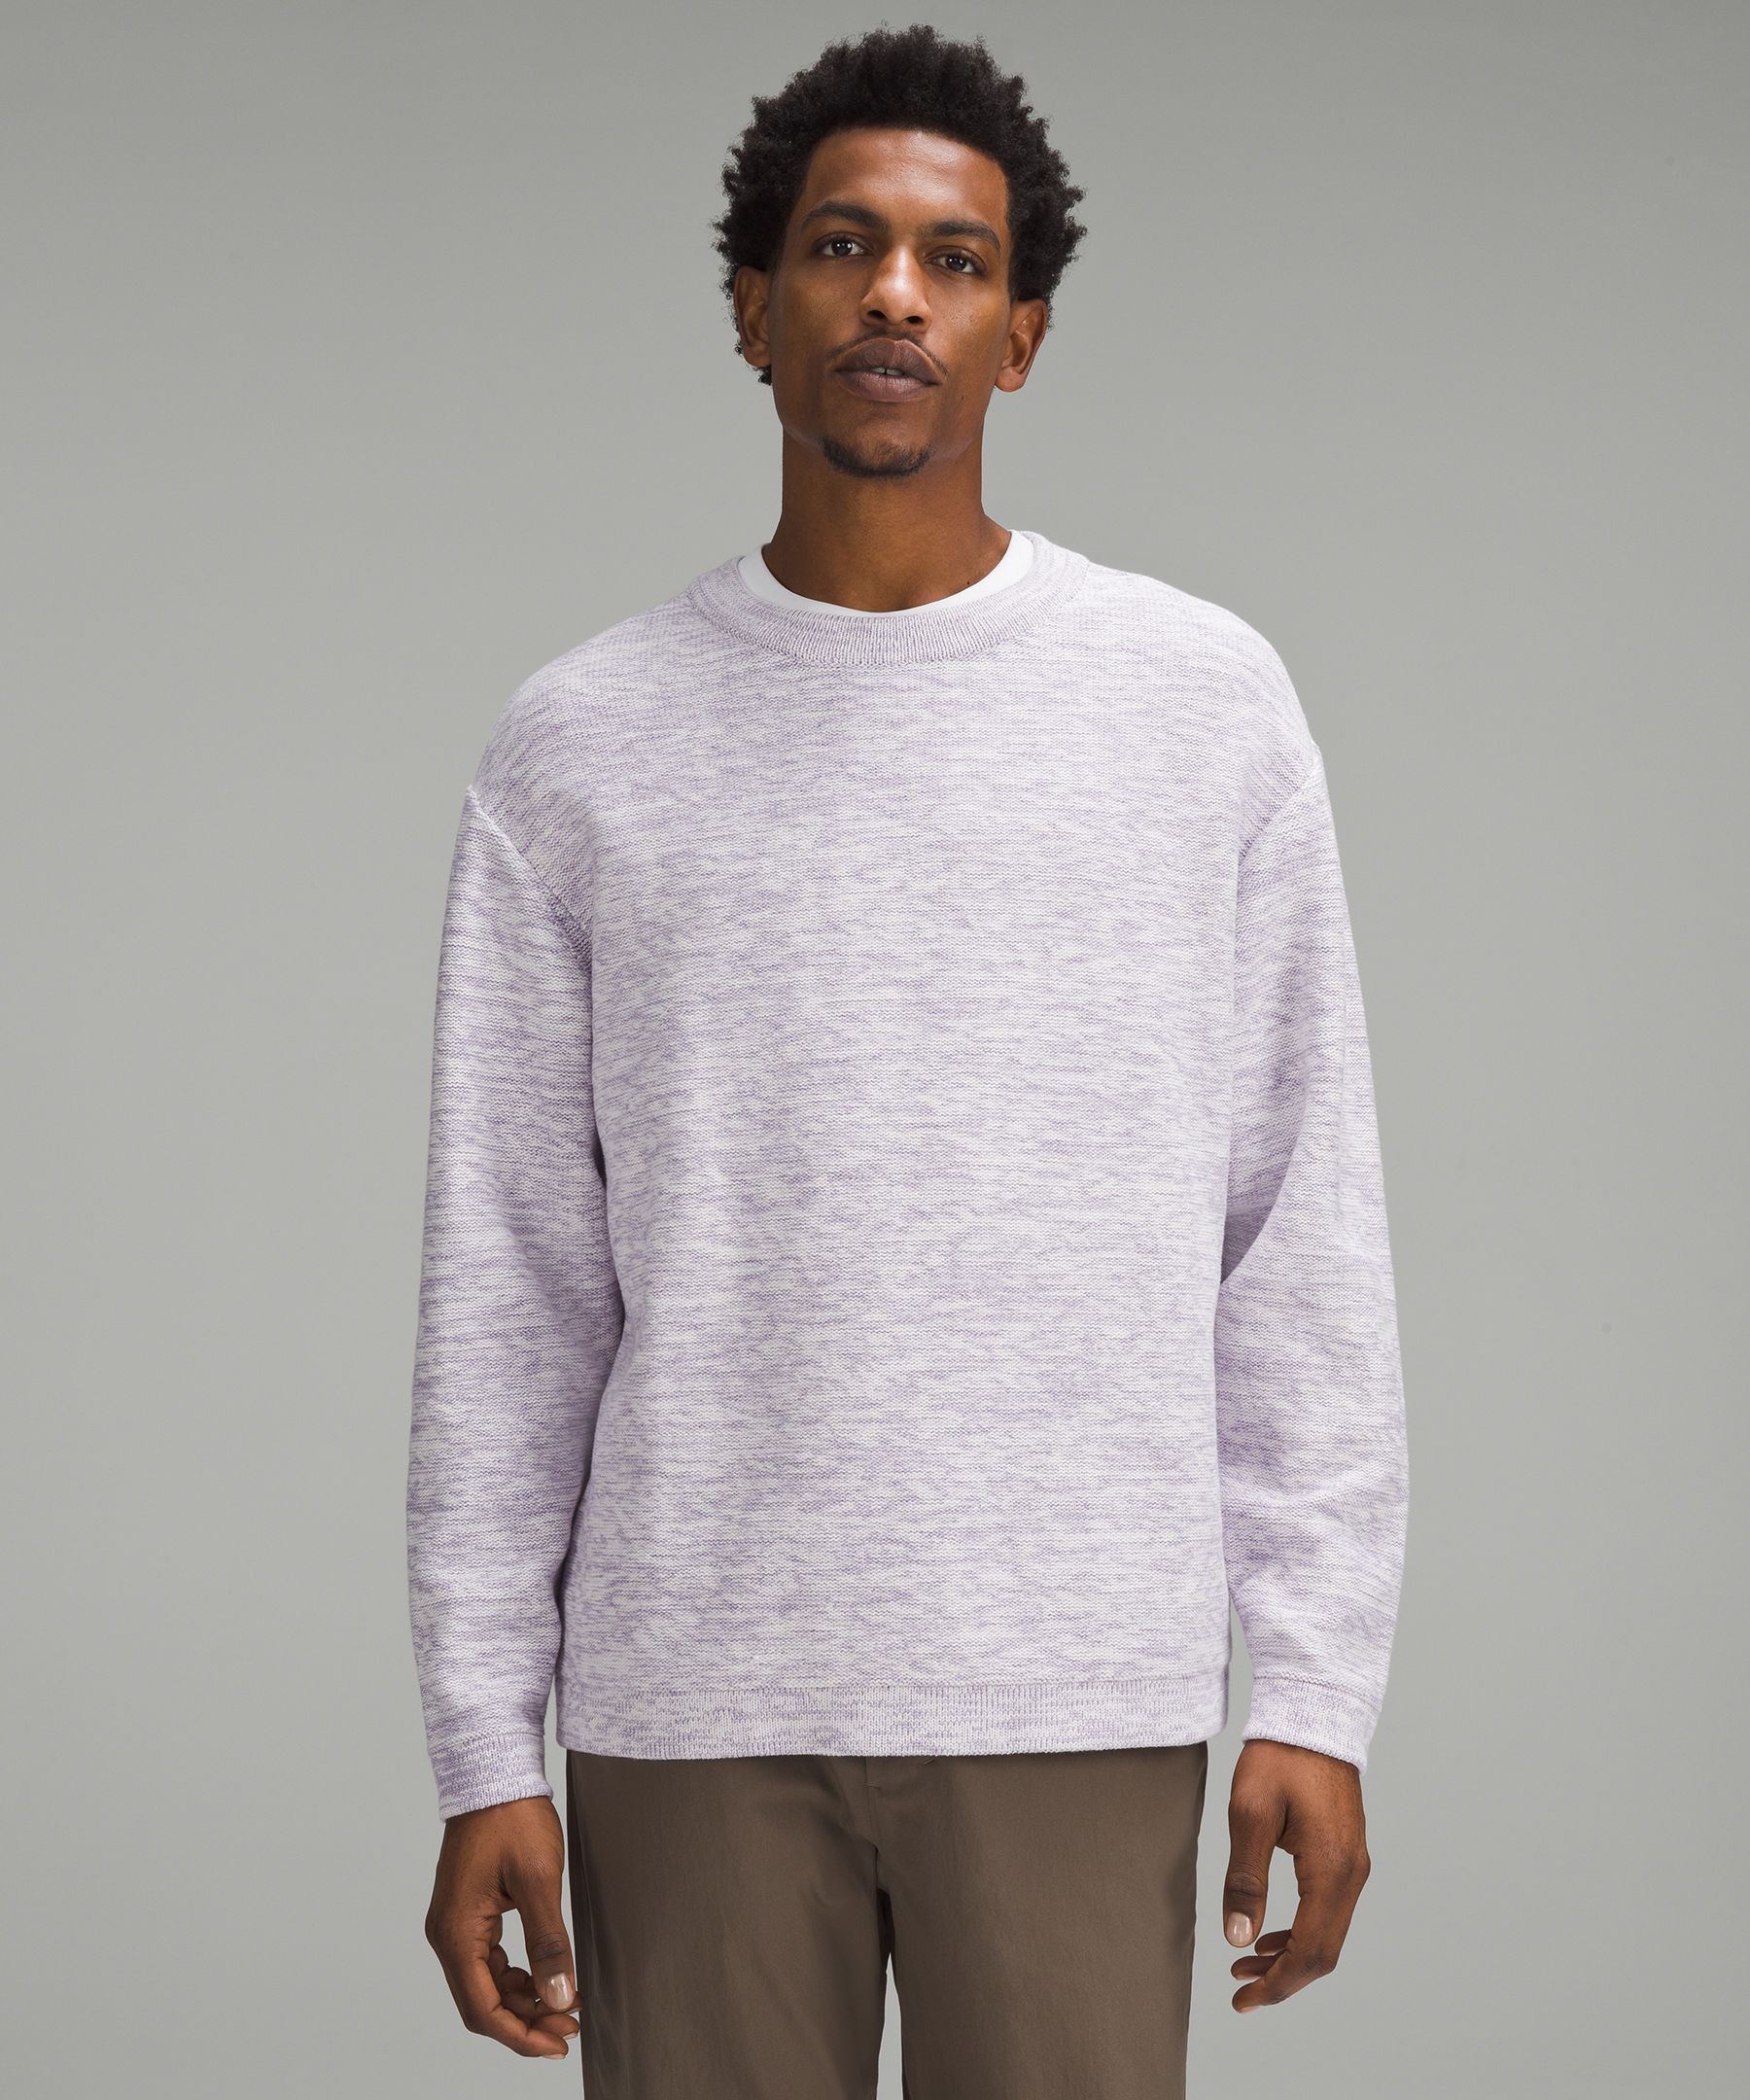 Relaxed-Fit Crewneck Knit Sweater, Men's Hoodies & Sweatshirts